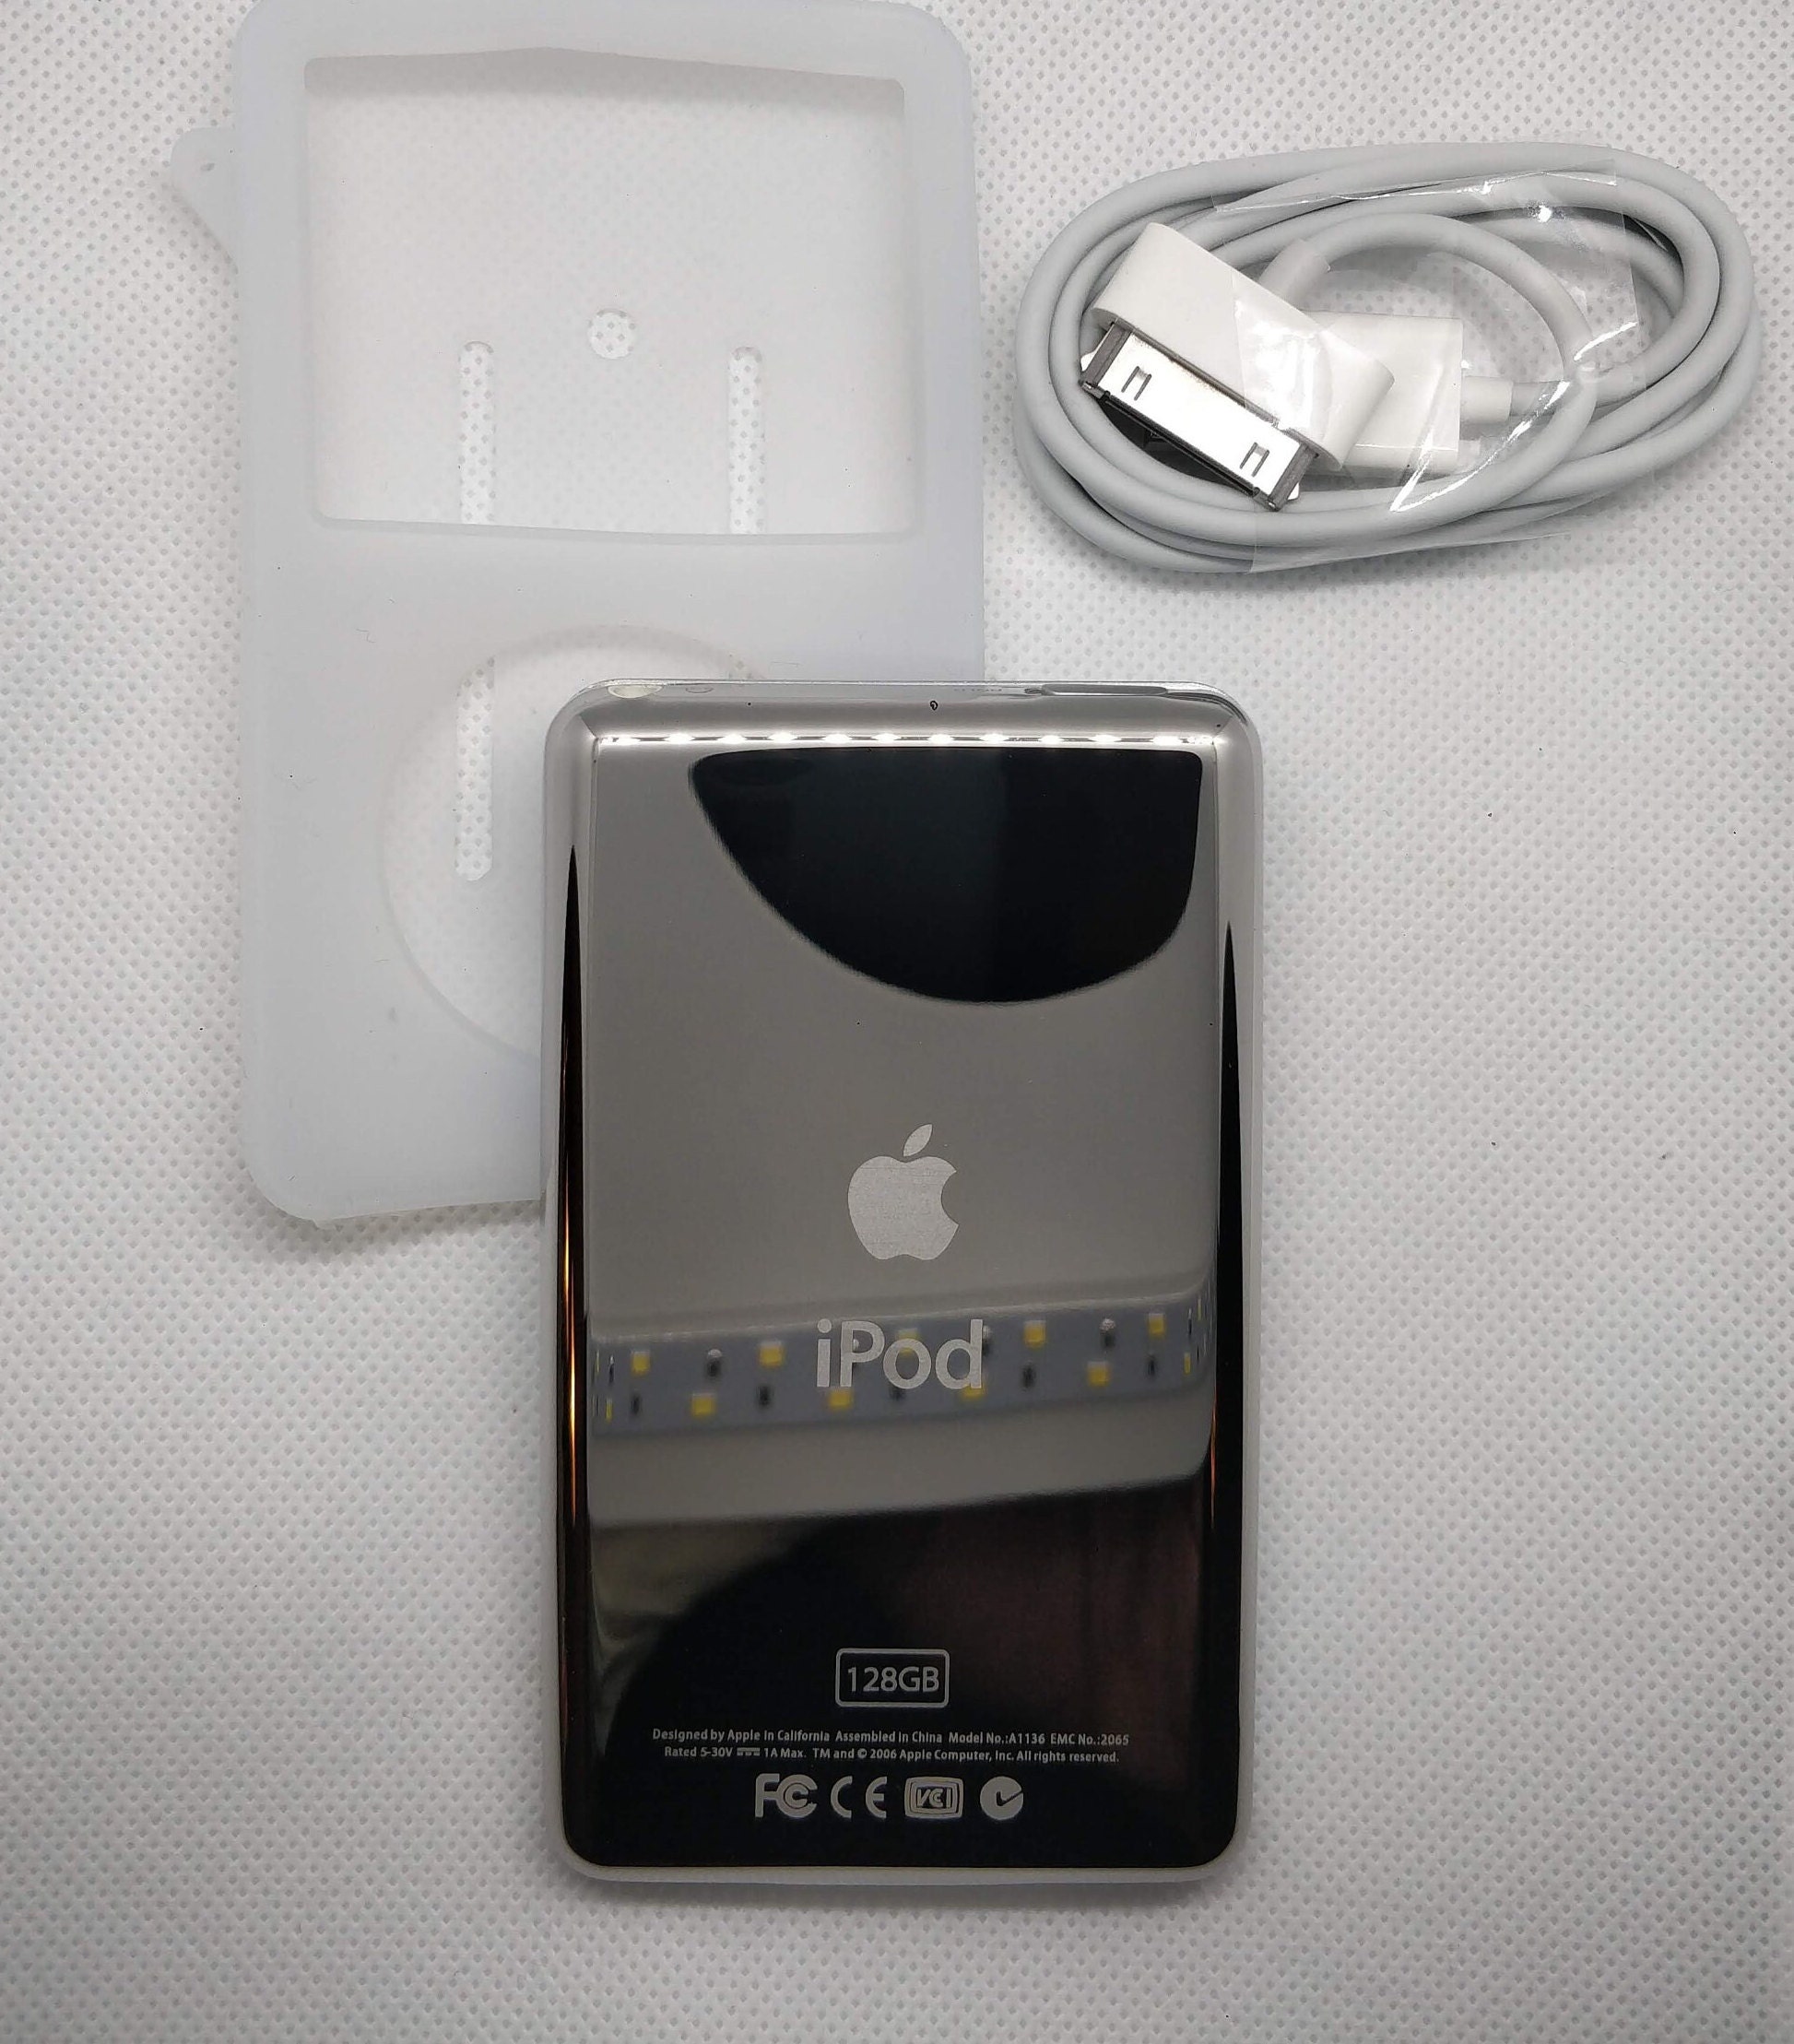  Apple Music Player iPod Classic 7th Generation 160gb Silver  Packaged in Plain White Box (Renewed) : Electronics